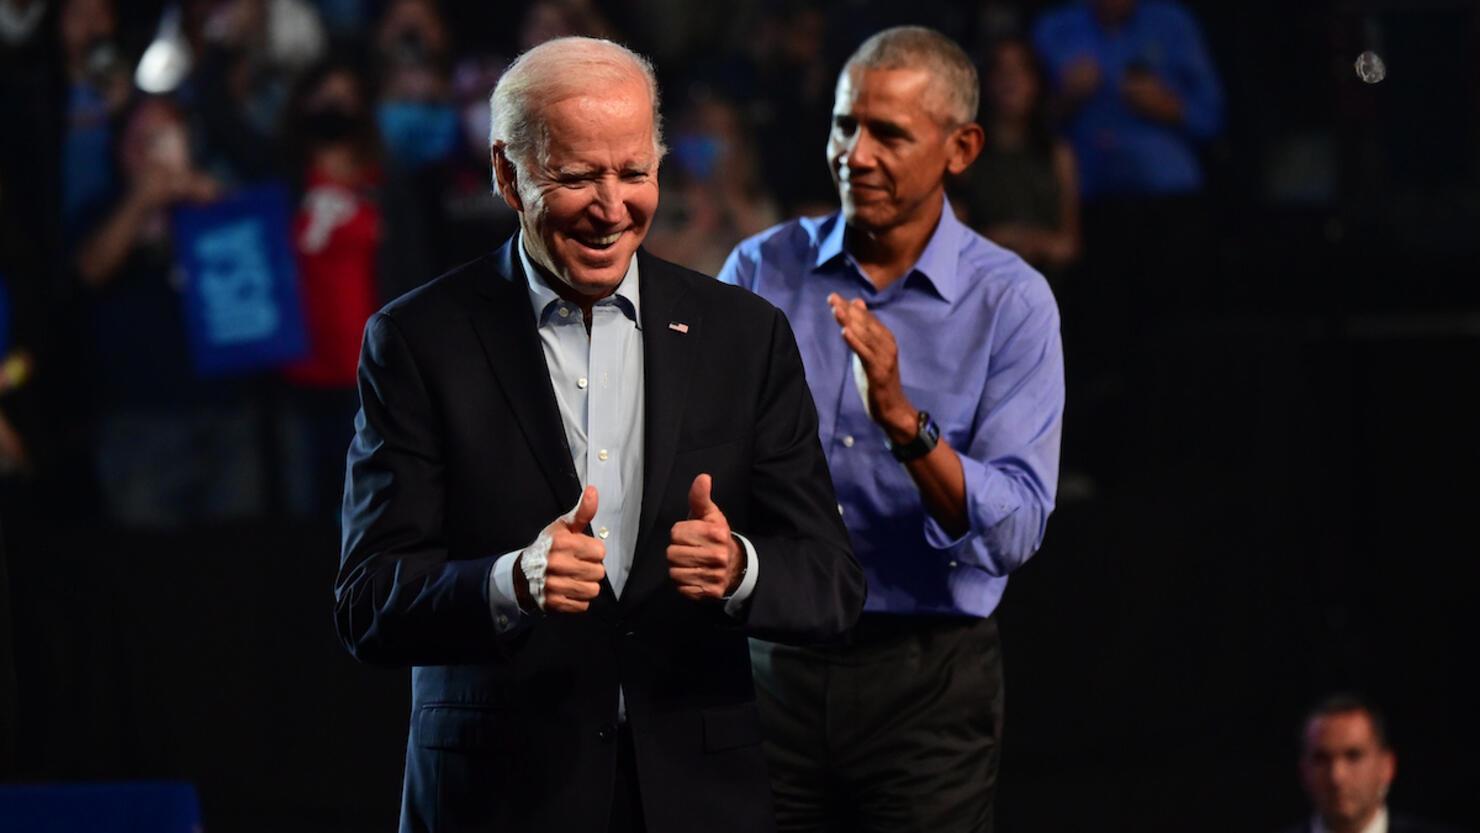 President Biden And Former President Obama Campaign In Philadelphia For State's Democratic Candidates